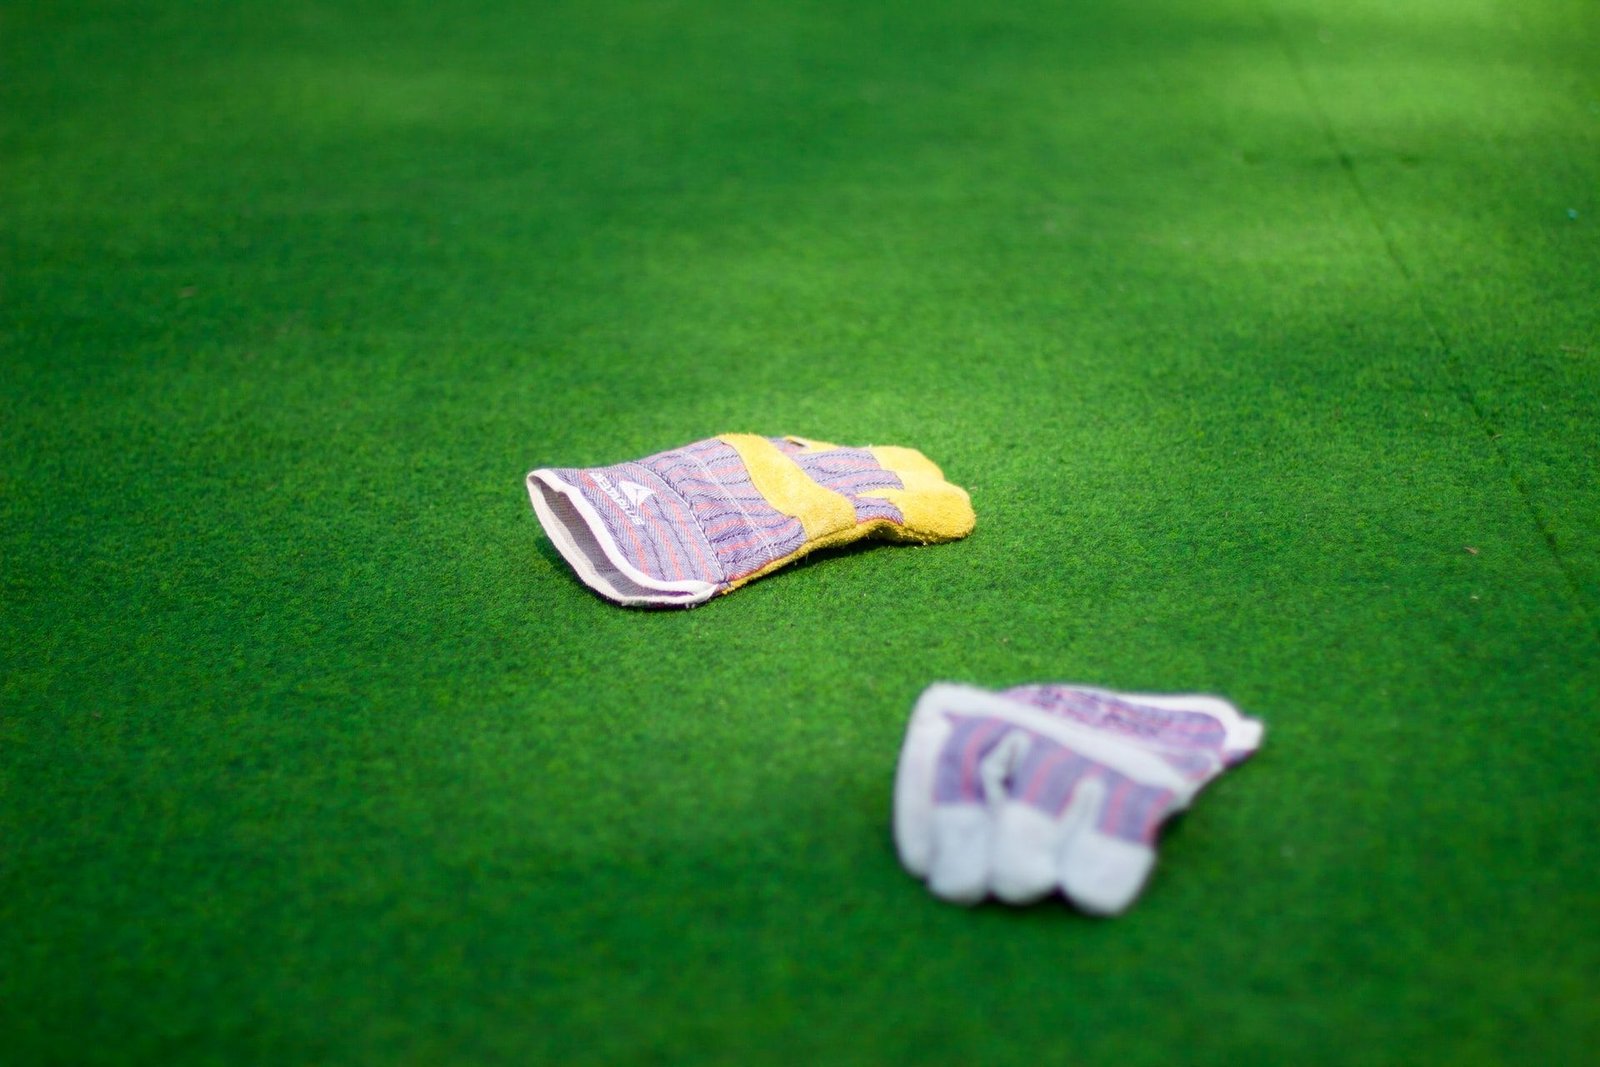 Two work gloves are lying on green grass. One glove is upright with the palm facing down, while the other is slightly crumpled. The gloves are mostly yellow with a purple and white patterned fabric on the cuffs and the backs of the hands, blending seamlessly against the expertly installed turf by Tampa Turf Solutions.